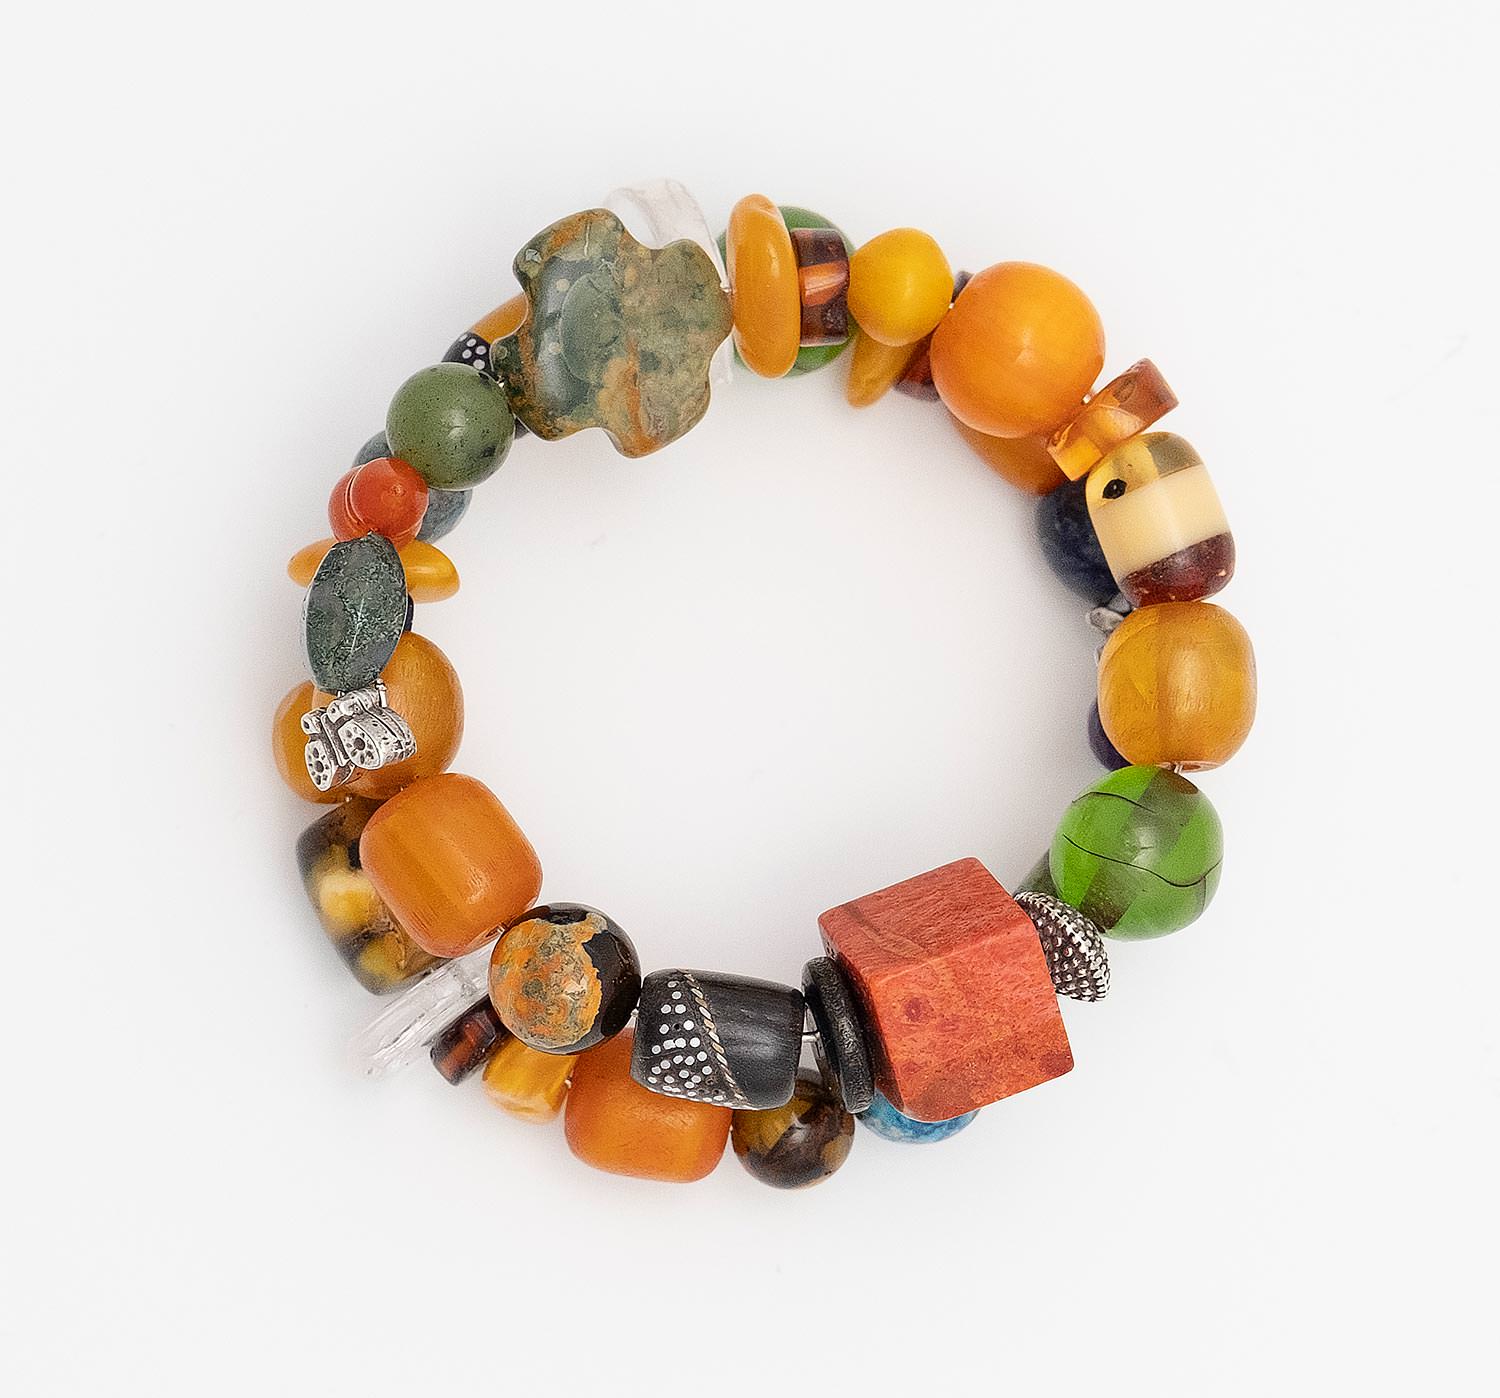 Bracelets made of old Artificial Resin Mixtures